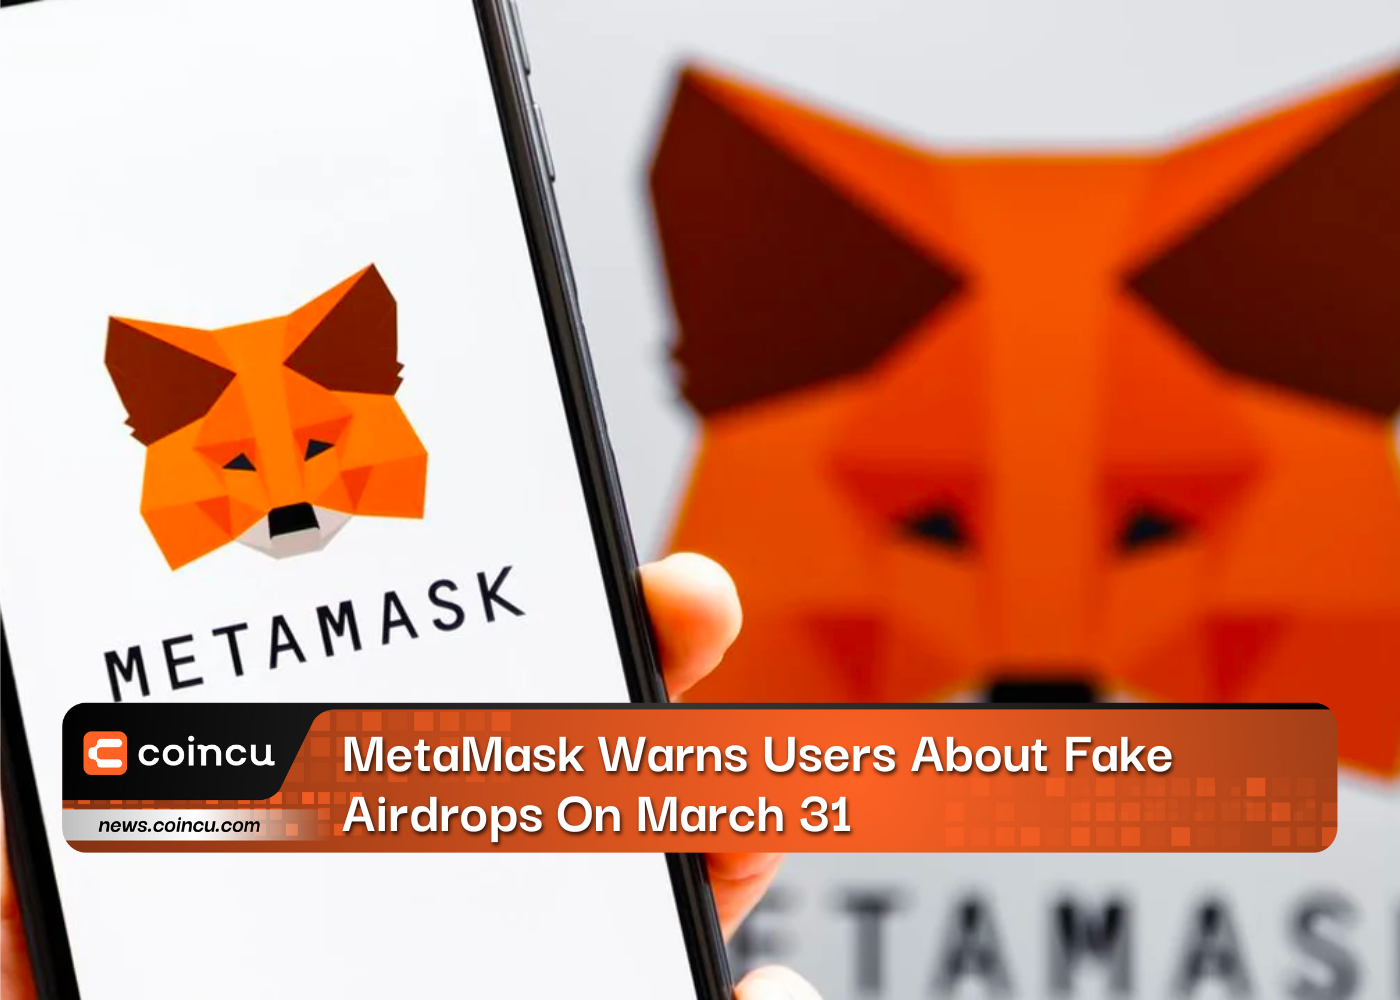 MetaMask Warns Users About Fake Airdrops On March 31